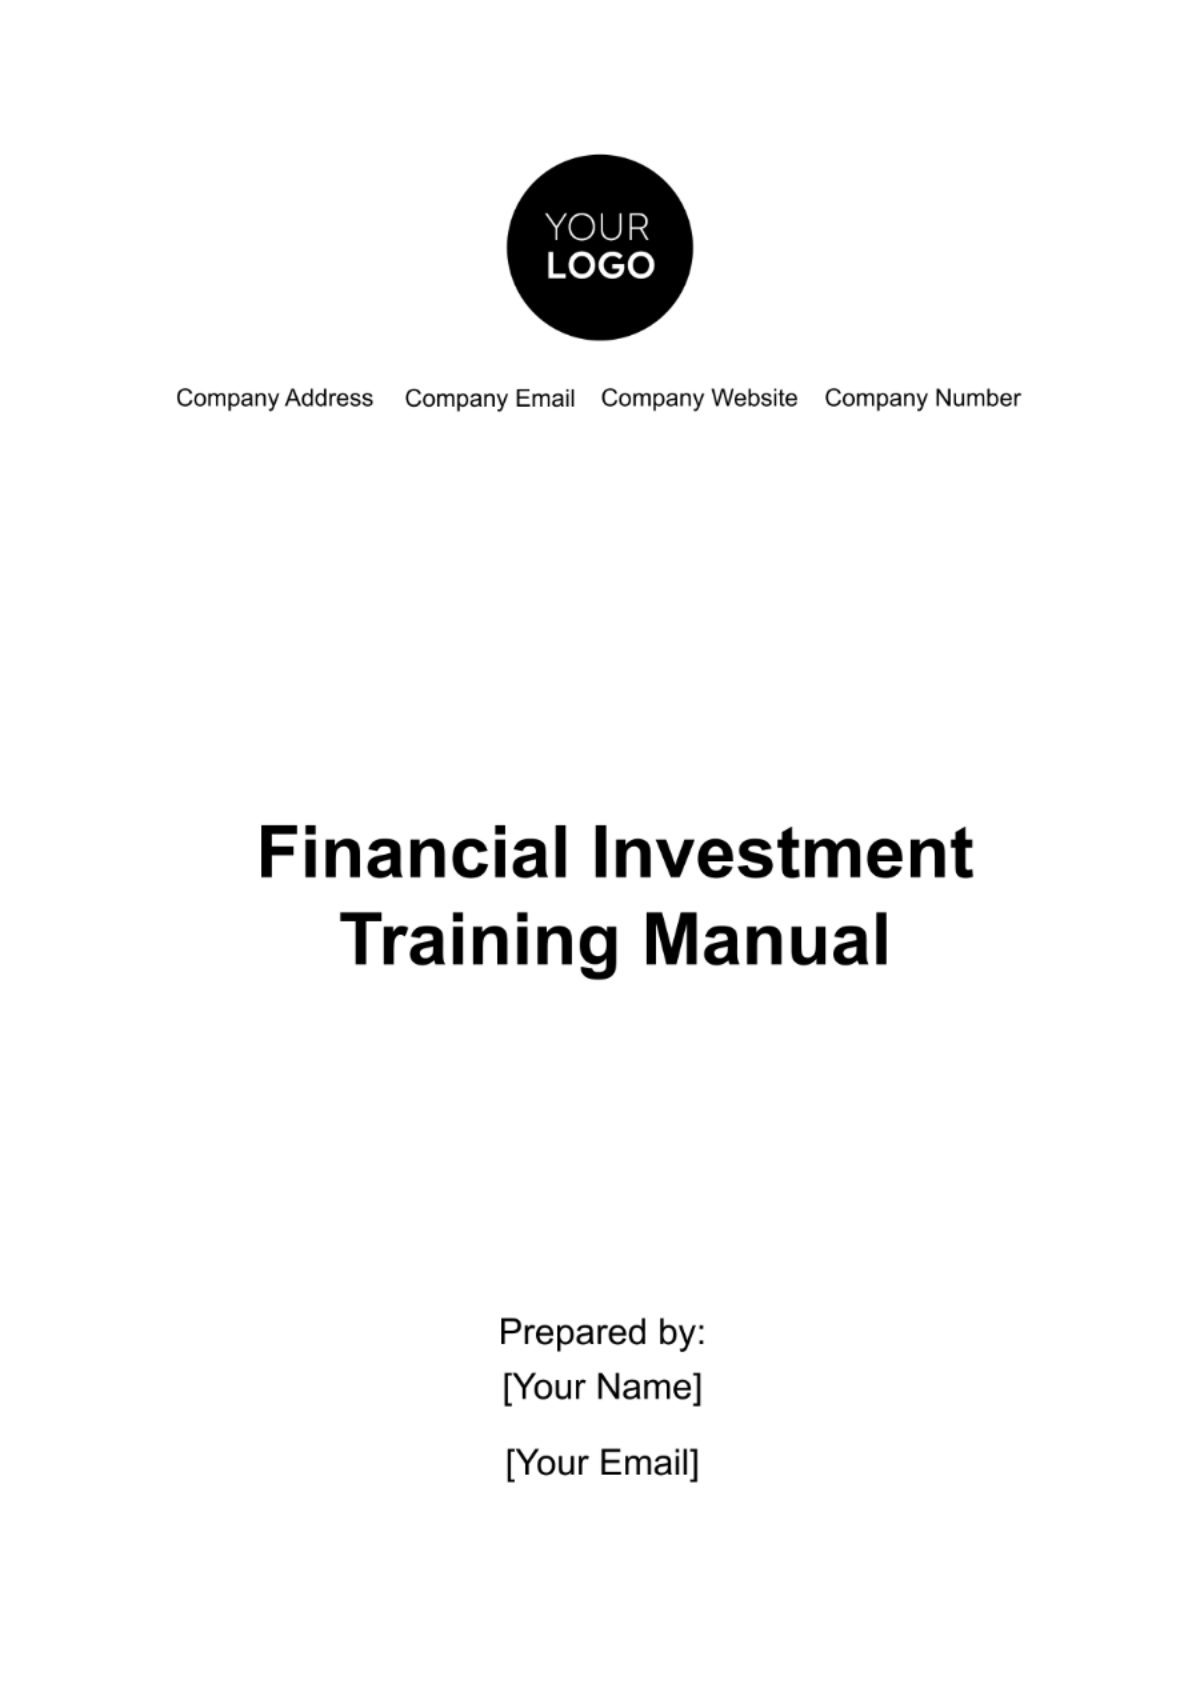 Financial Investment Training Manual Template